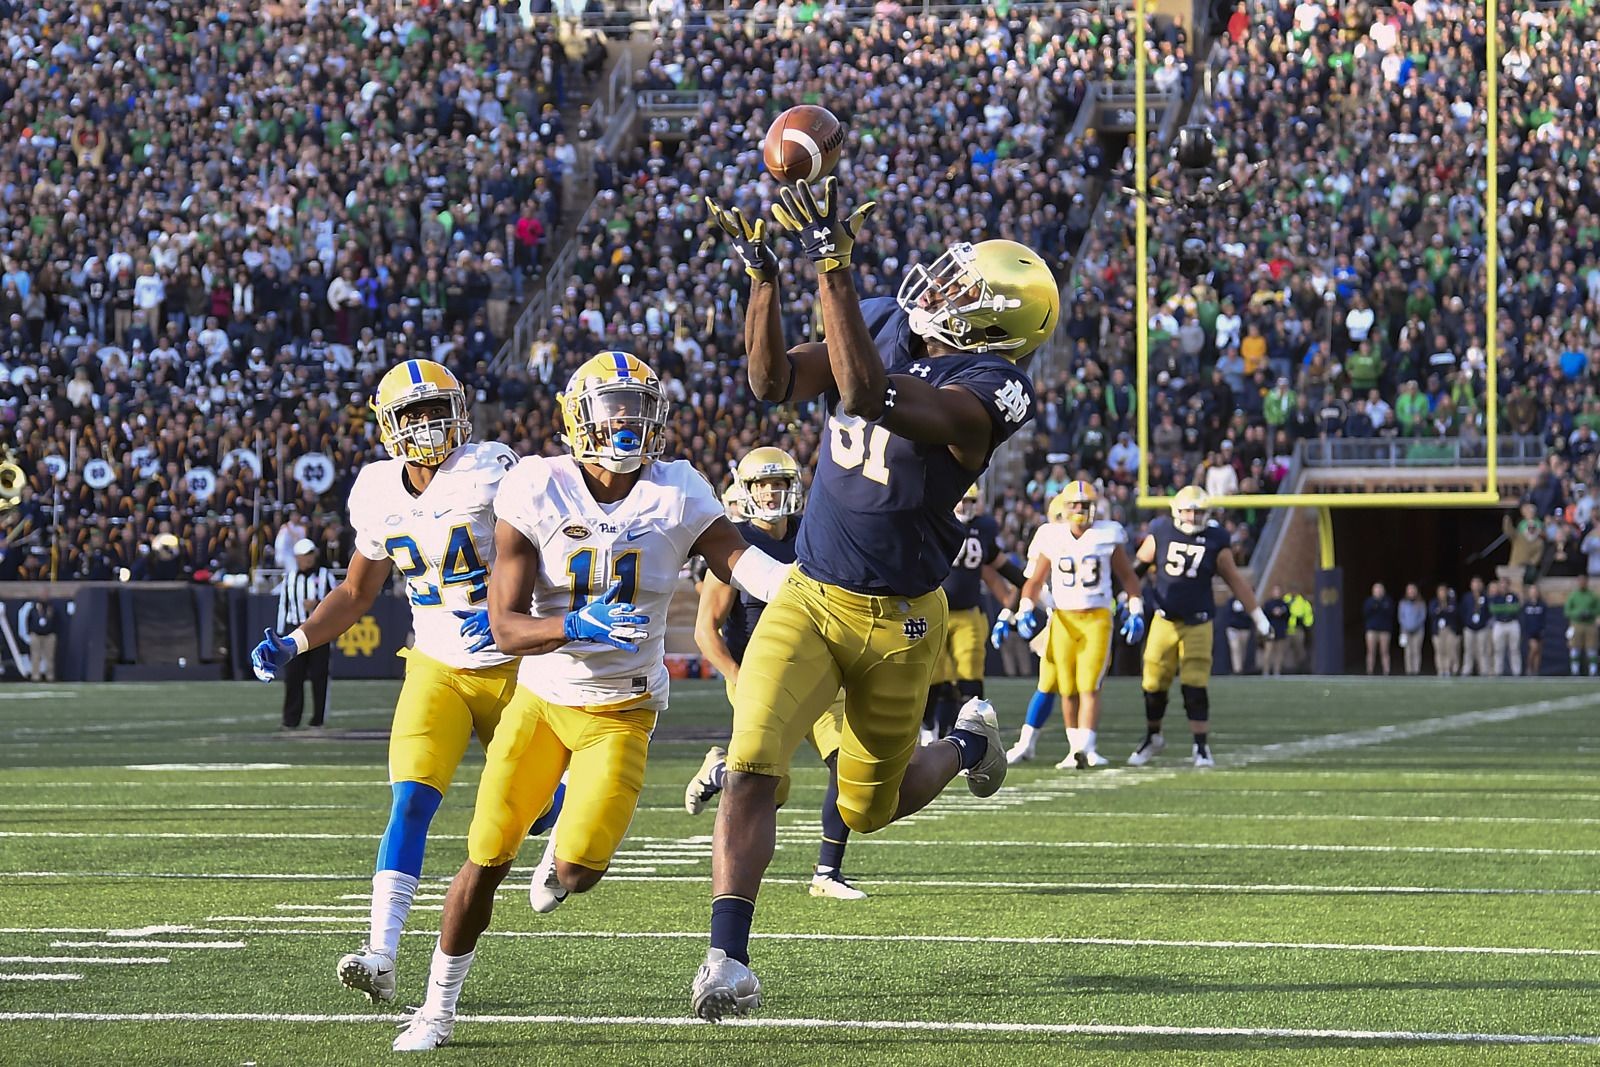 Notre Dame Football: Top Three Plays of the 2018 Season